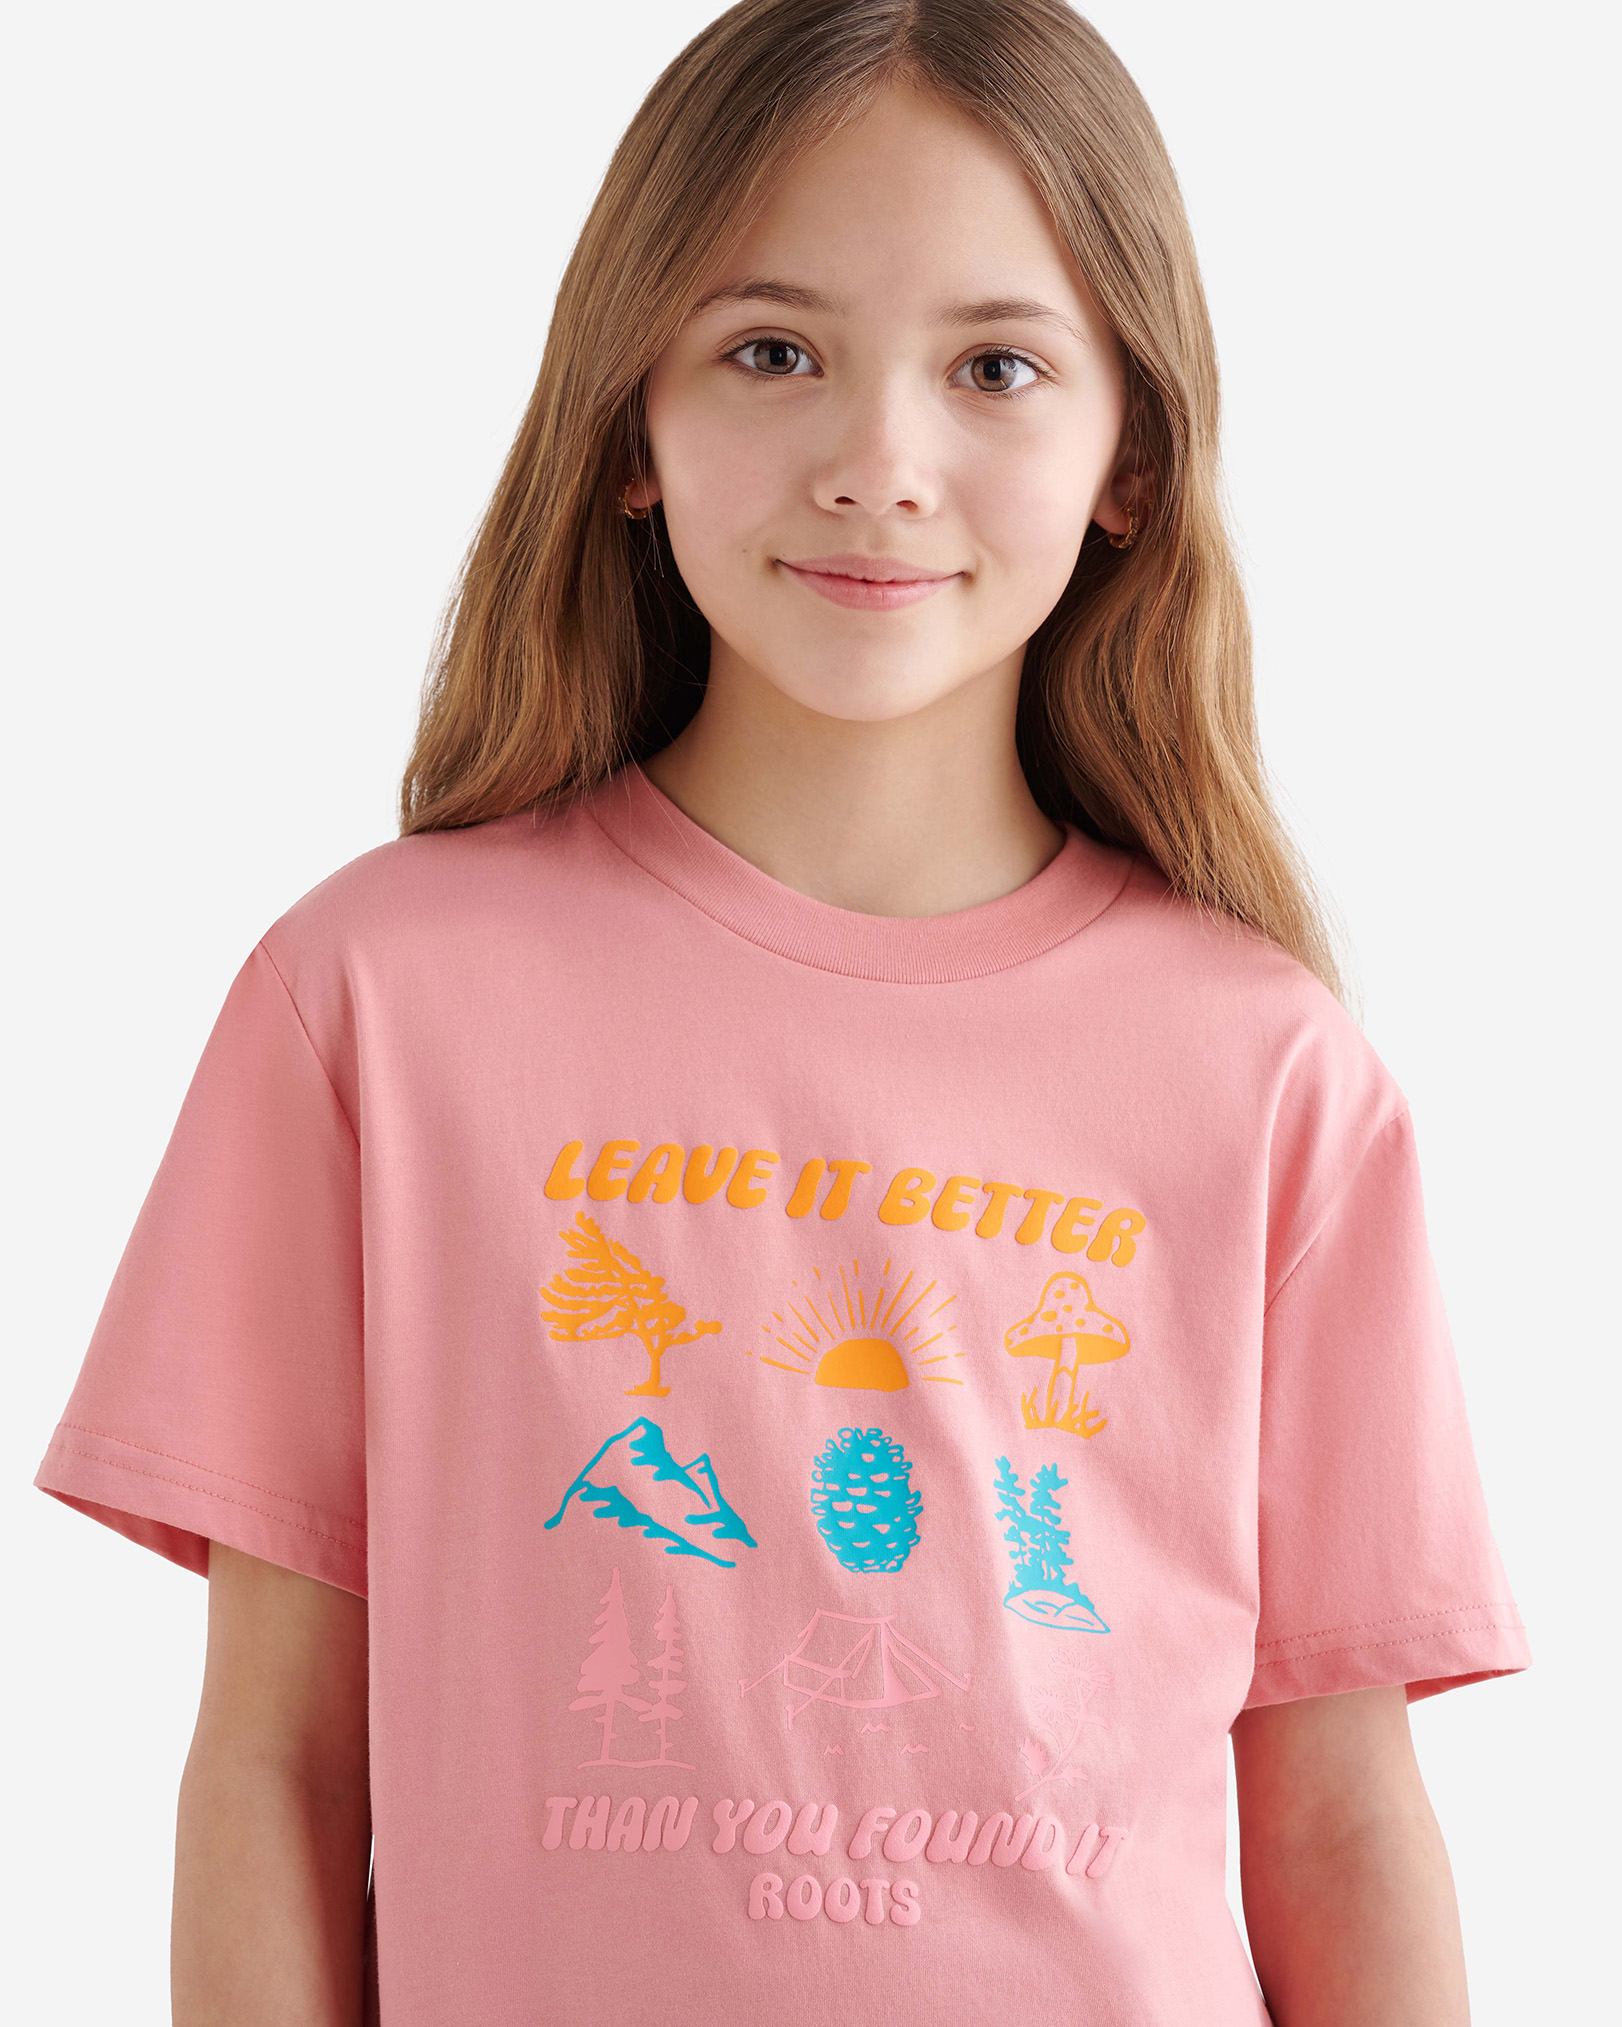 Roots Kids Nature Graphic T-Shirt in Mauveglow